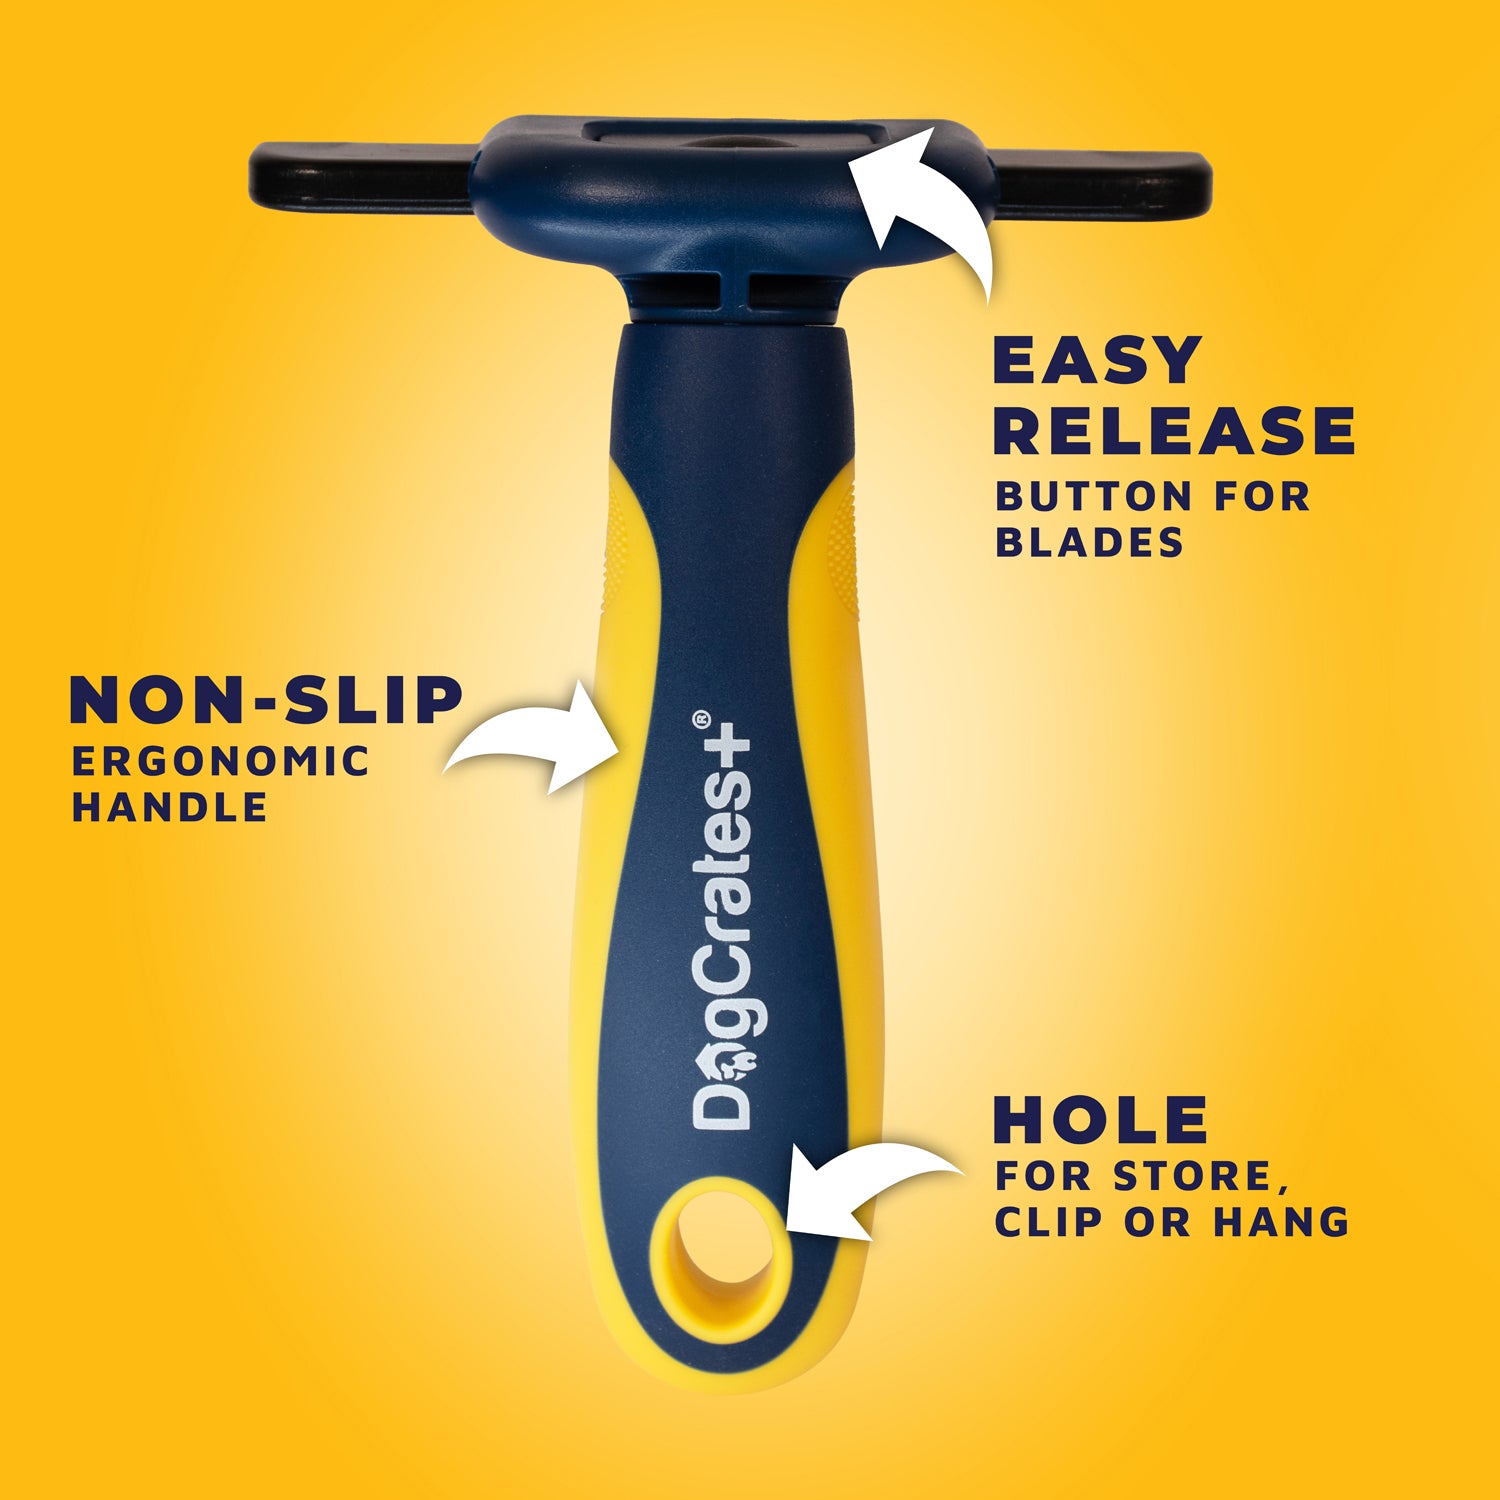 Conair Pro Shed It With 3 Deshedding Blade For Dogs